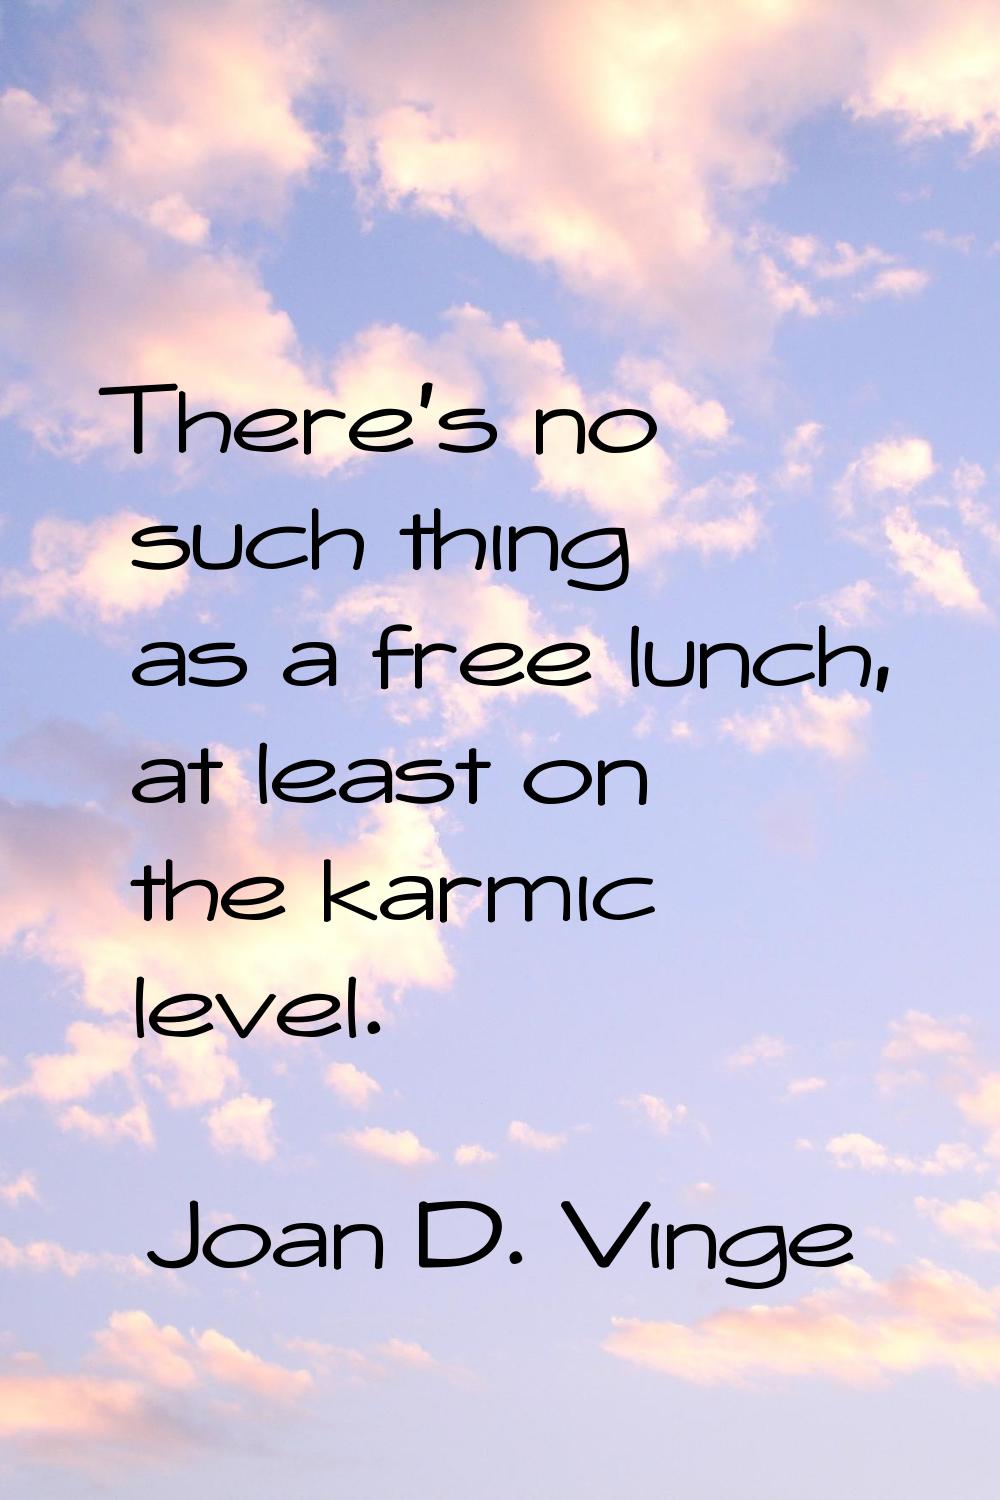 There's no such thing as a free lunch, at least on the karmic level.